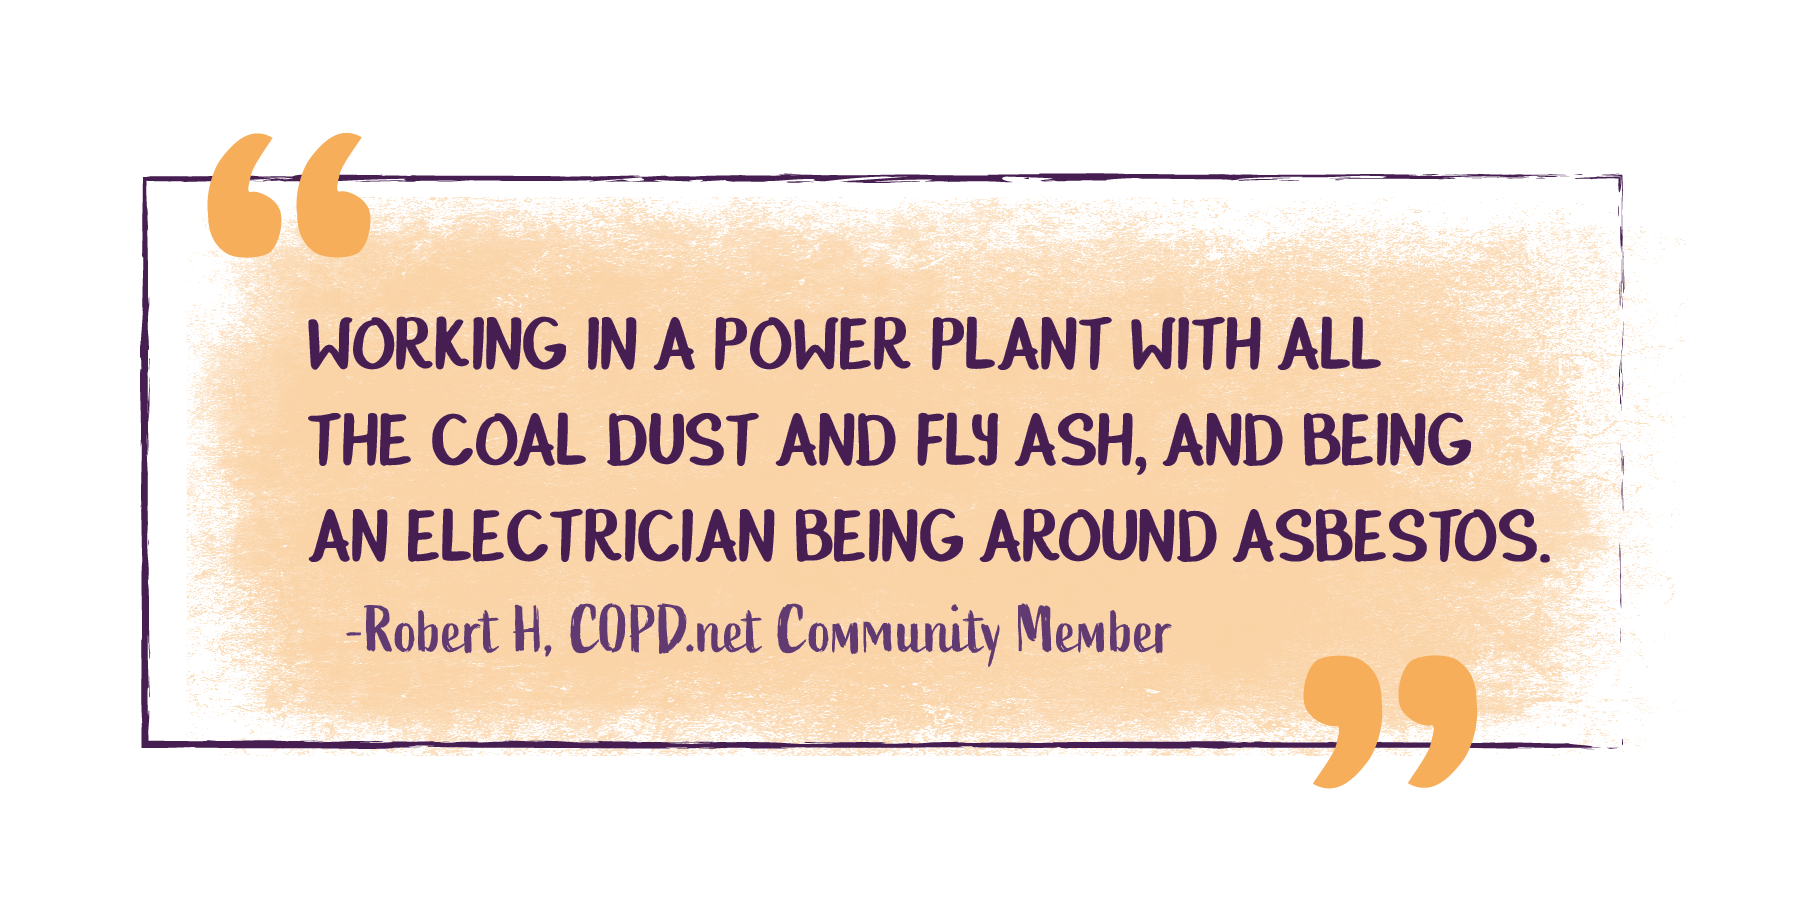 Working in a power plant with all the coal dust and fly ash, and being an electrician being around asbestos. -Robert H, COPD.net Community Member